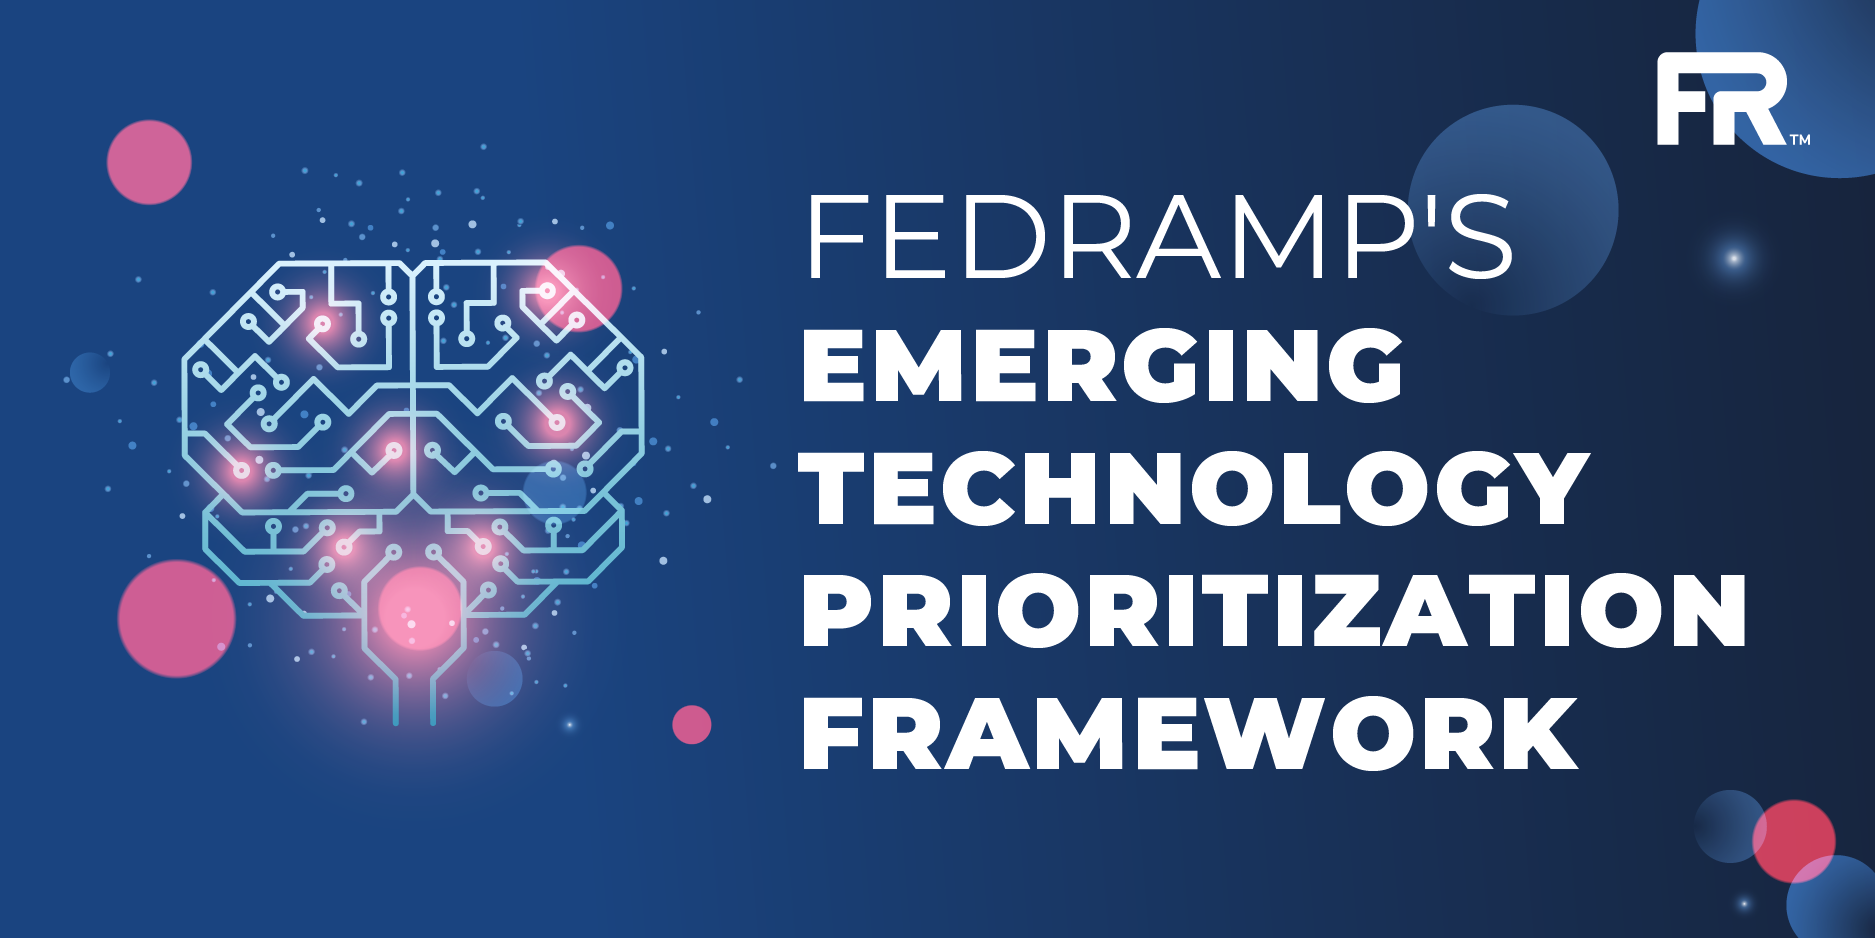 FedRAMP's Emerging Technology Prioritization Framework - Overview and Request for Comment